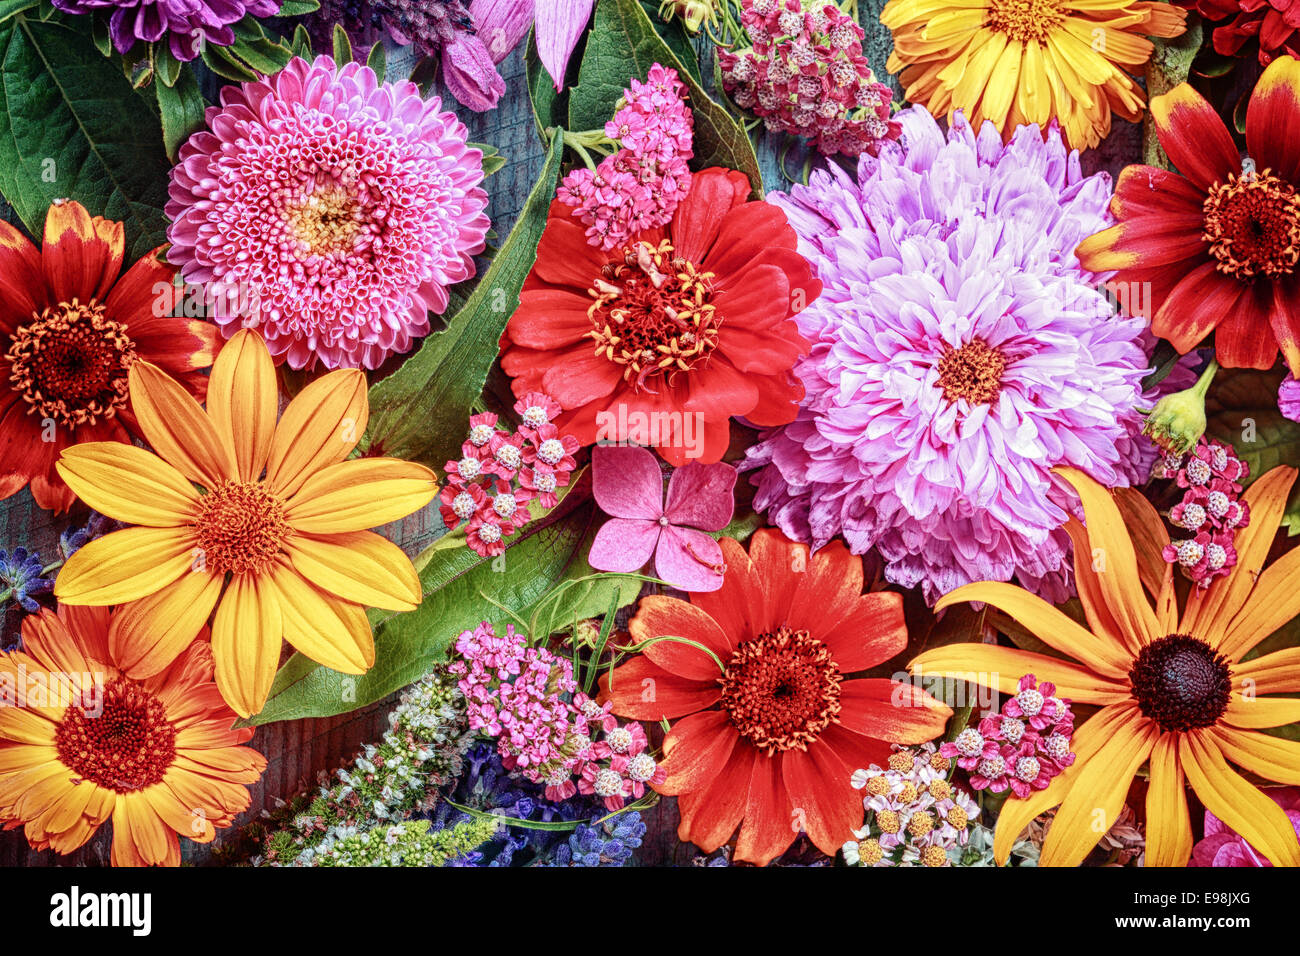 Festive vibrant floral background with a large arrangement of colorful summer flowers in rainbow colors including dahlias and gerbera daisies for celebrating a special occasion or holiday Stock Photo